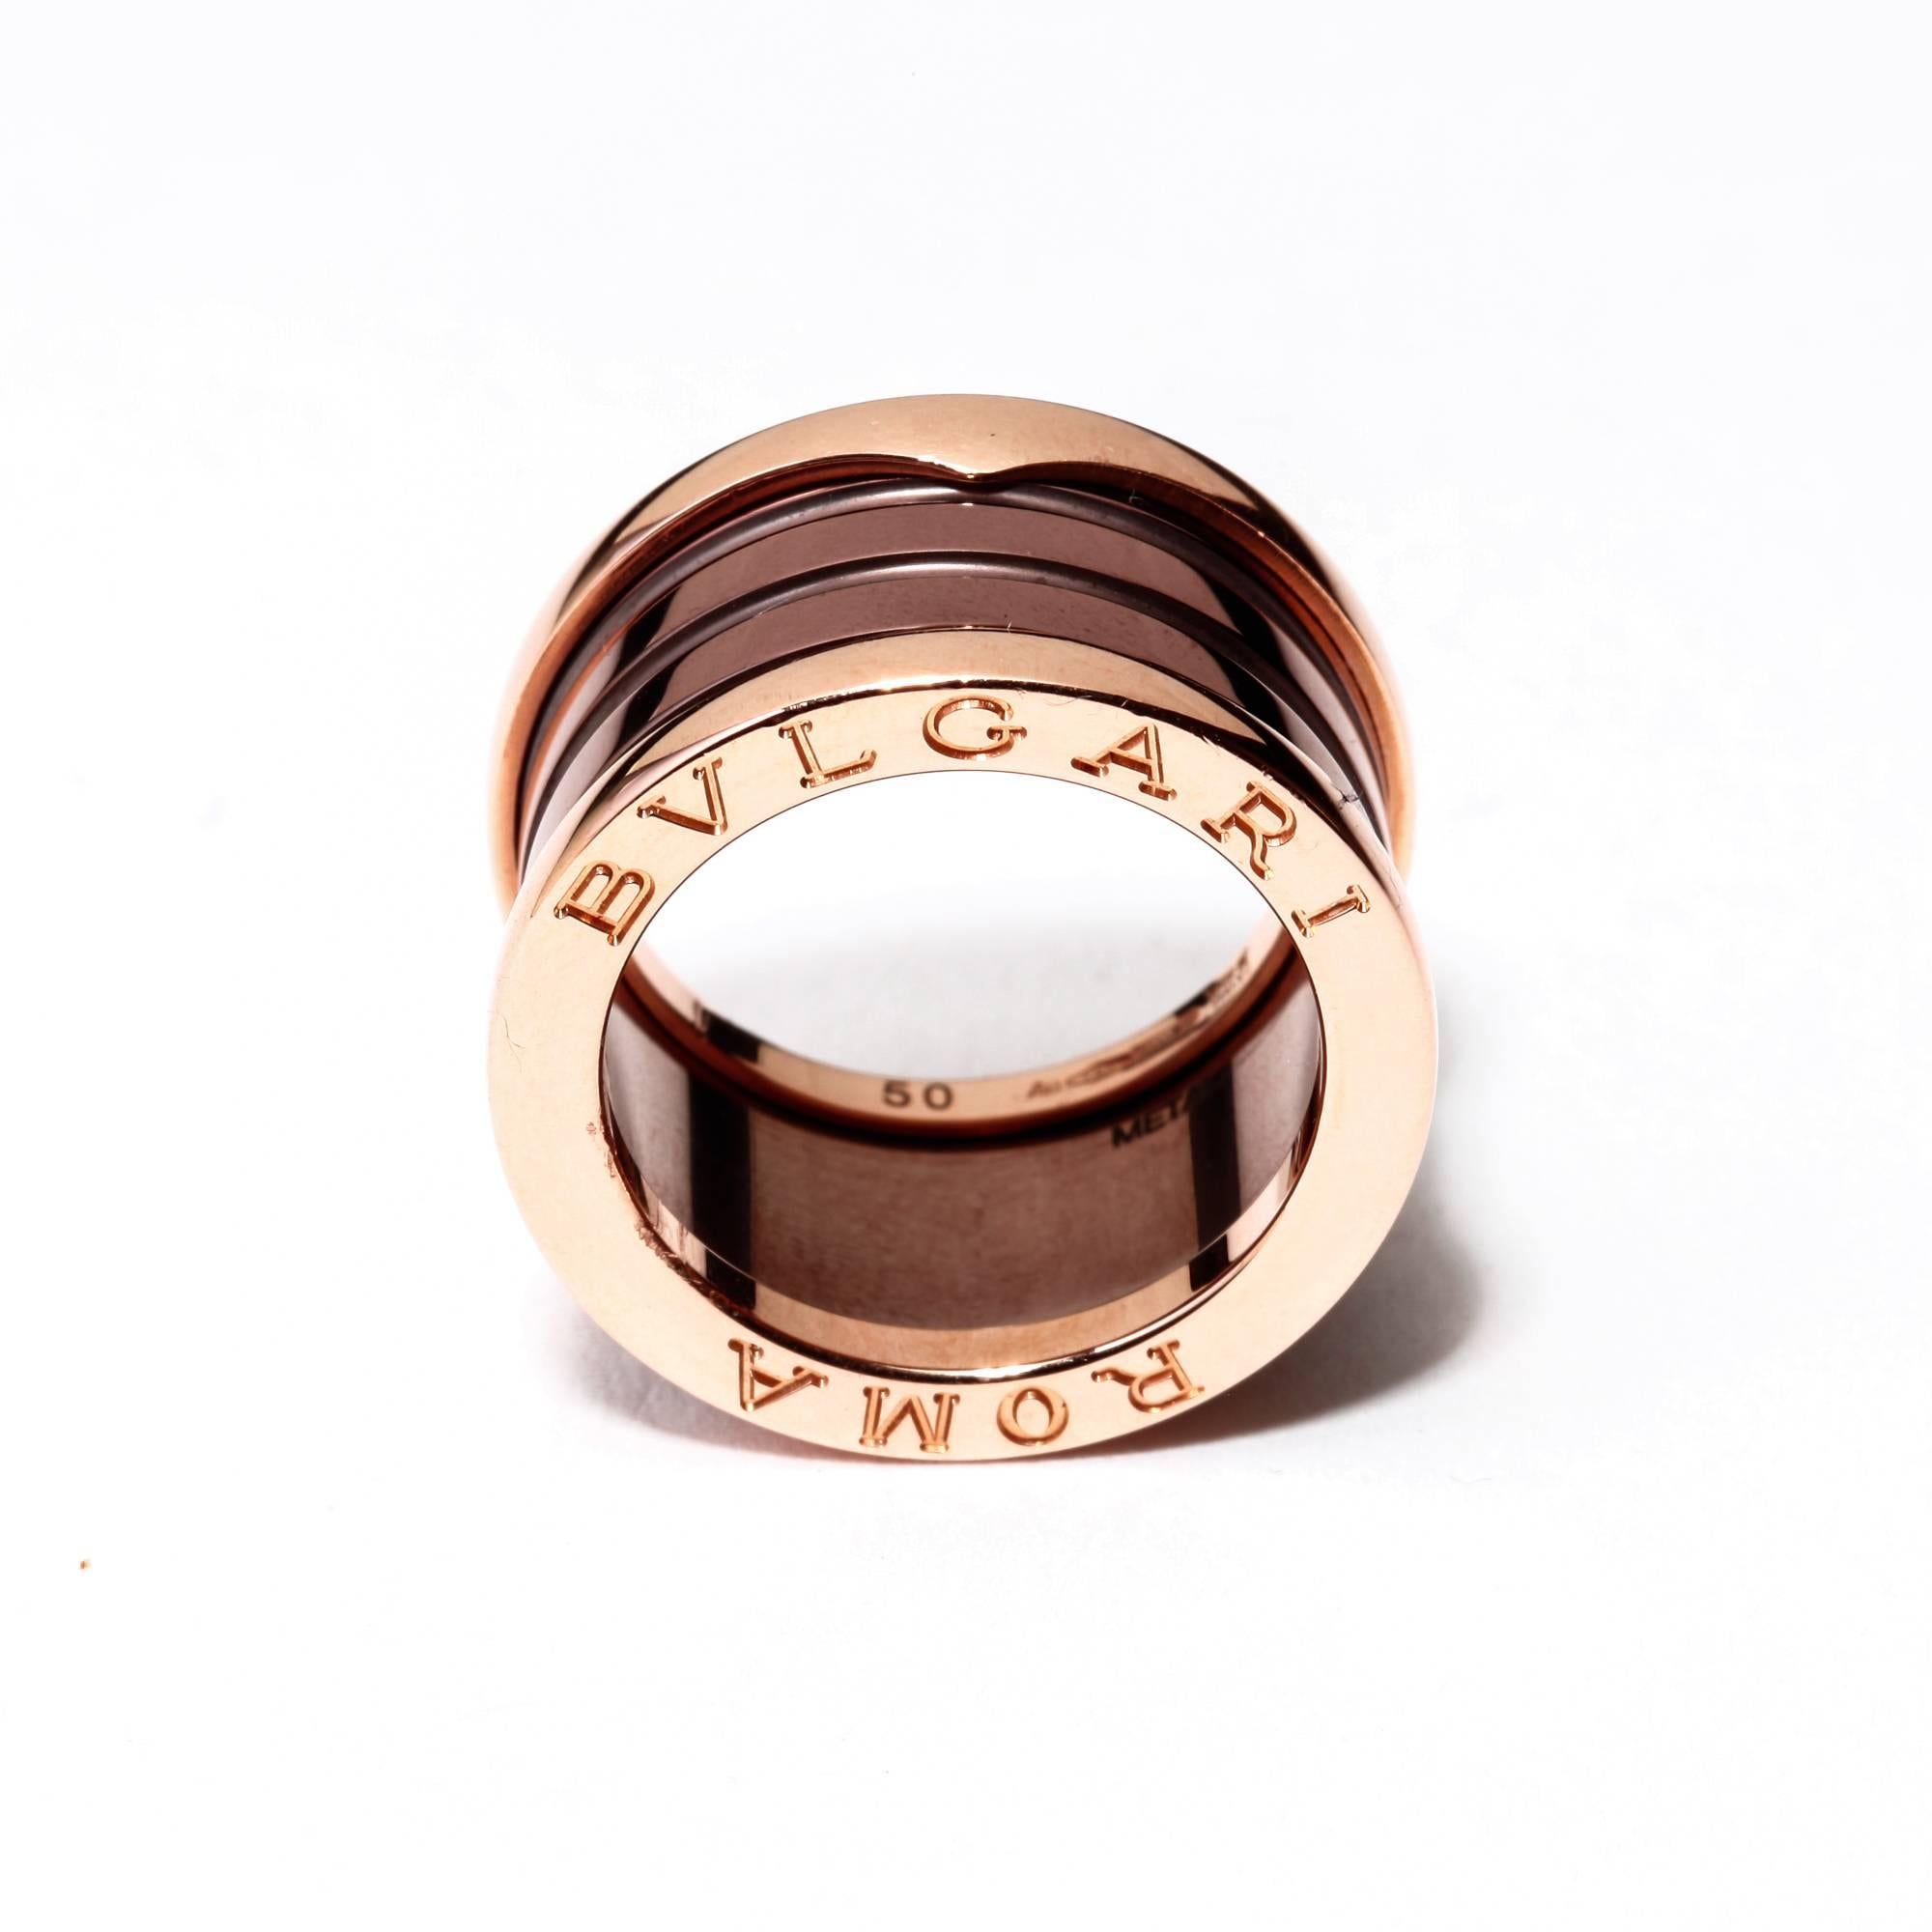 Inspired by the Colosseum in Rome, this 18k rose gold and bronze ceramic Bulgari B.zero1 ladies' special edition ROMA ring represents both the eternal city and modern Italian design. The ring is in new condition and would make a perfect gift. Please